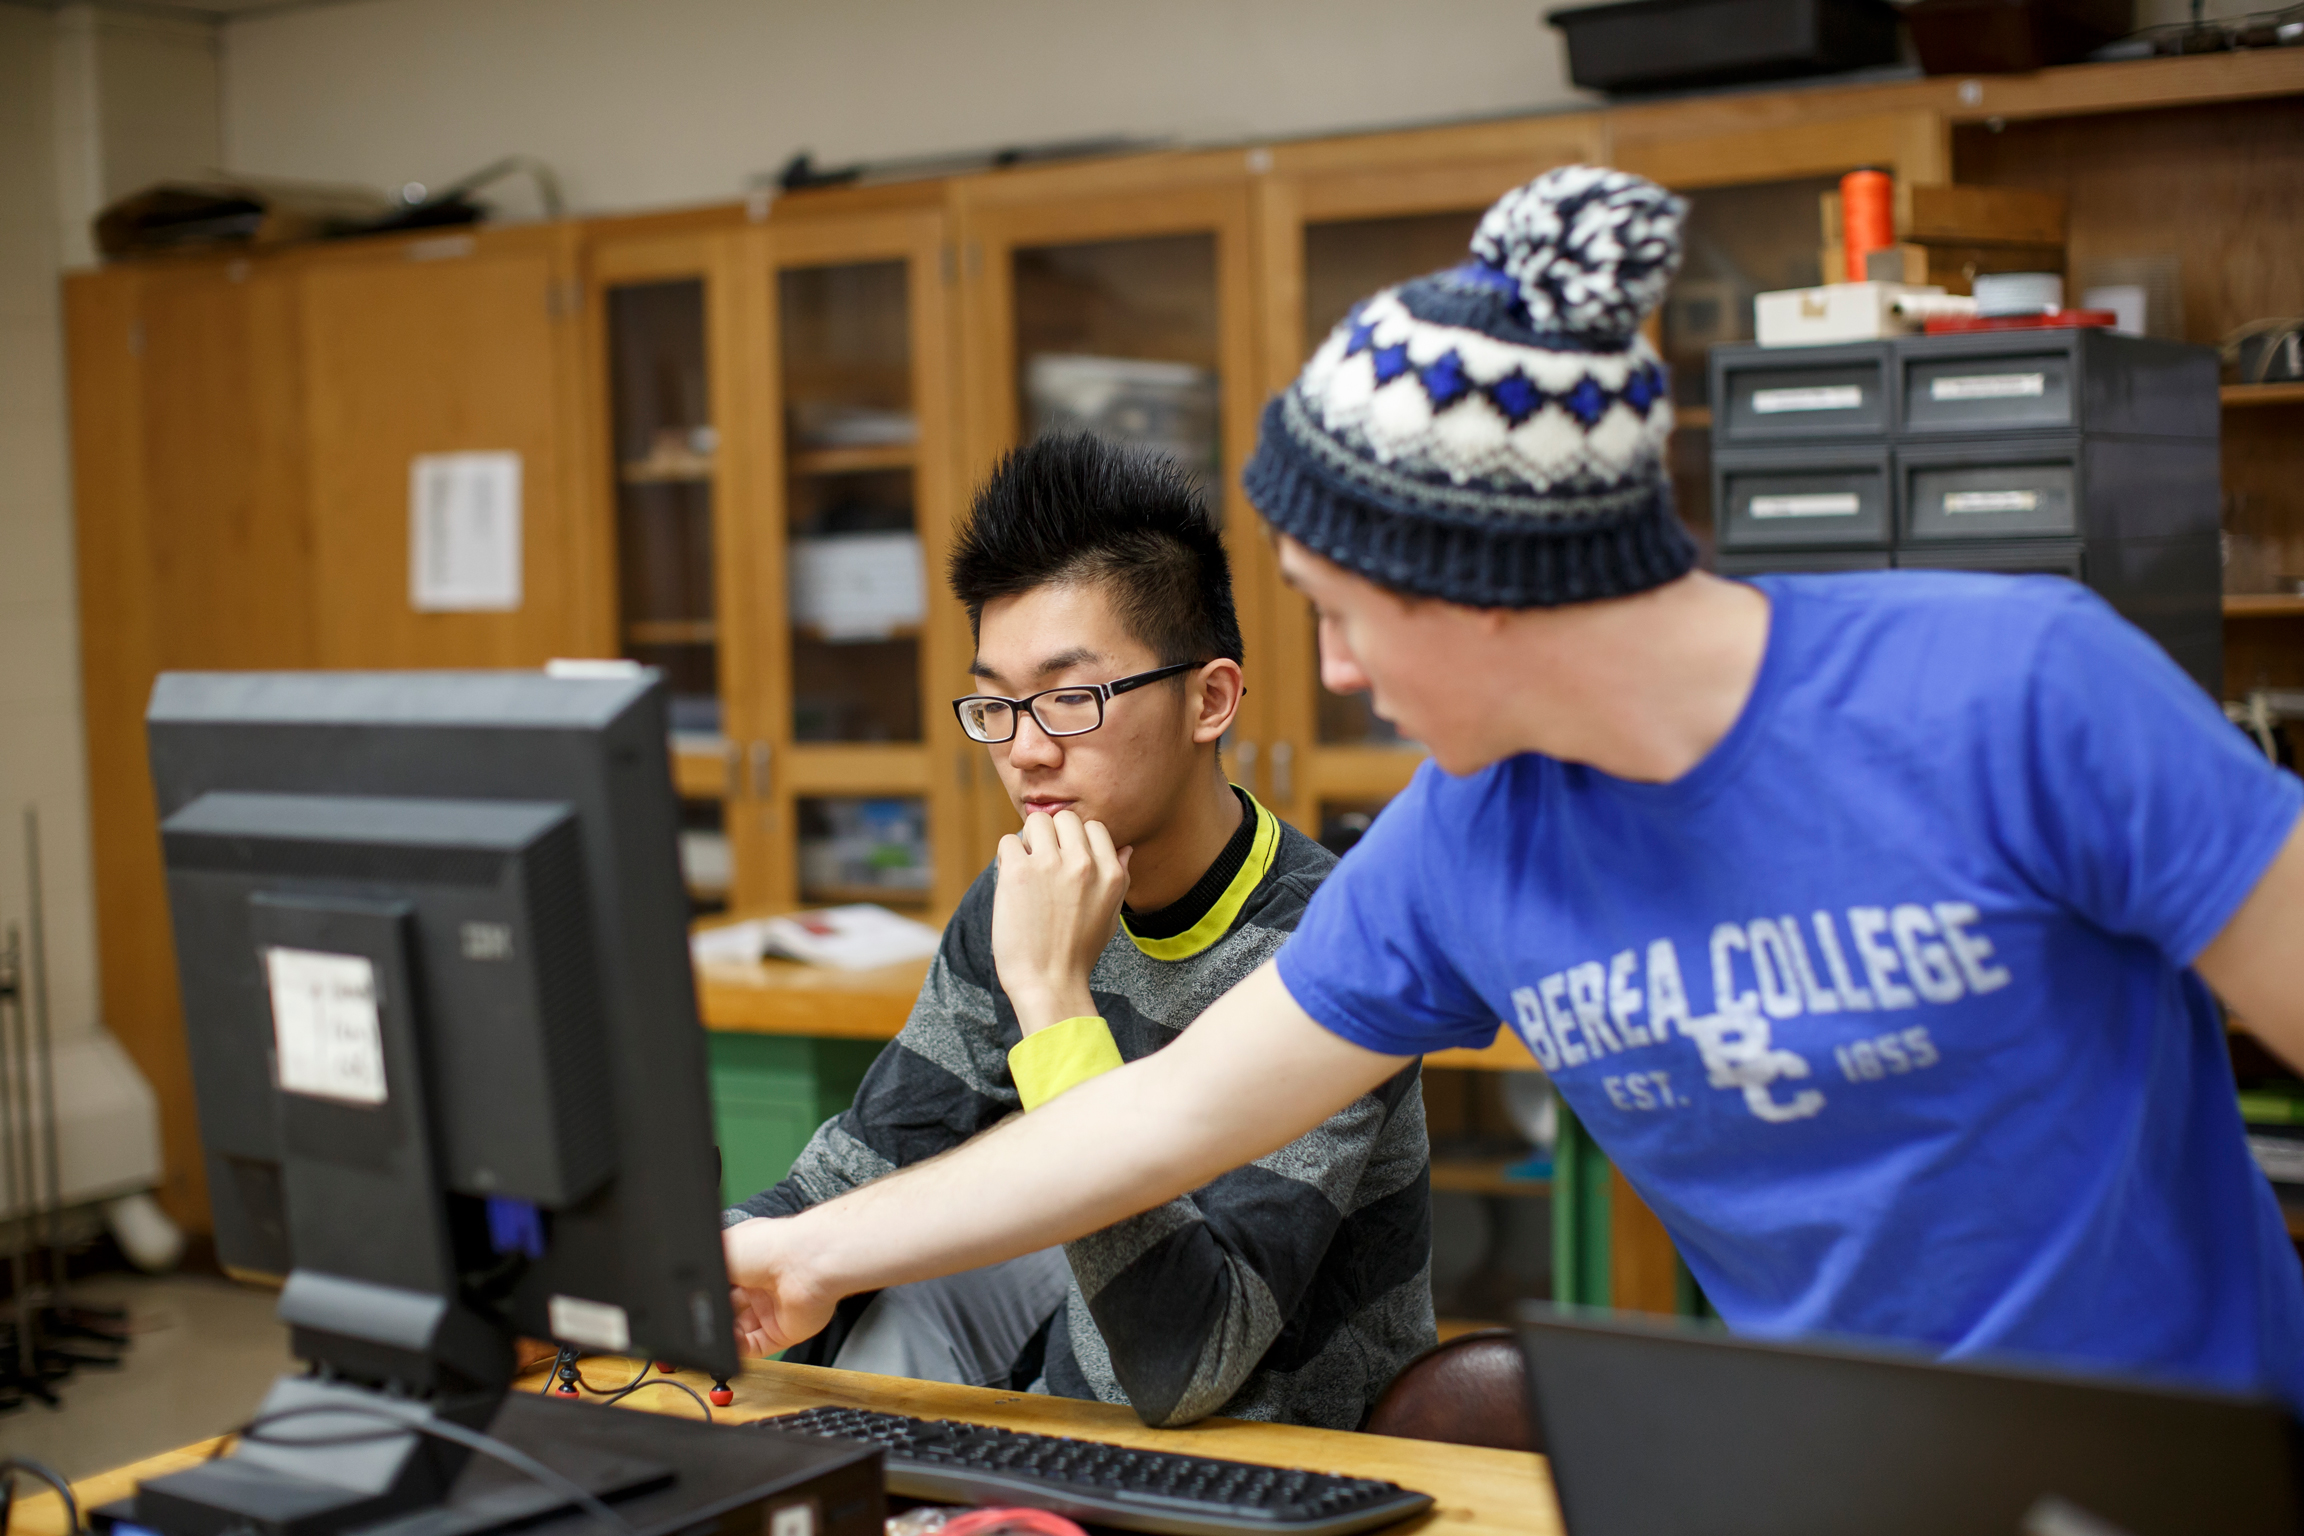 Two students working on a computer in a laboratory at Berea College